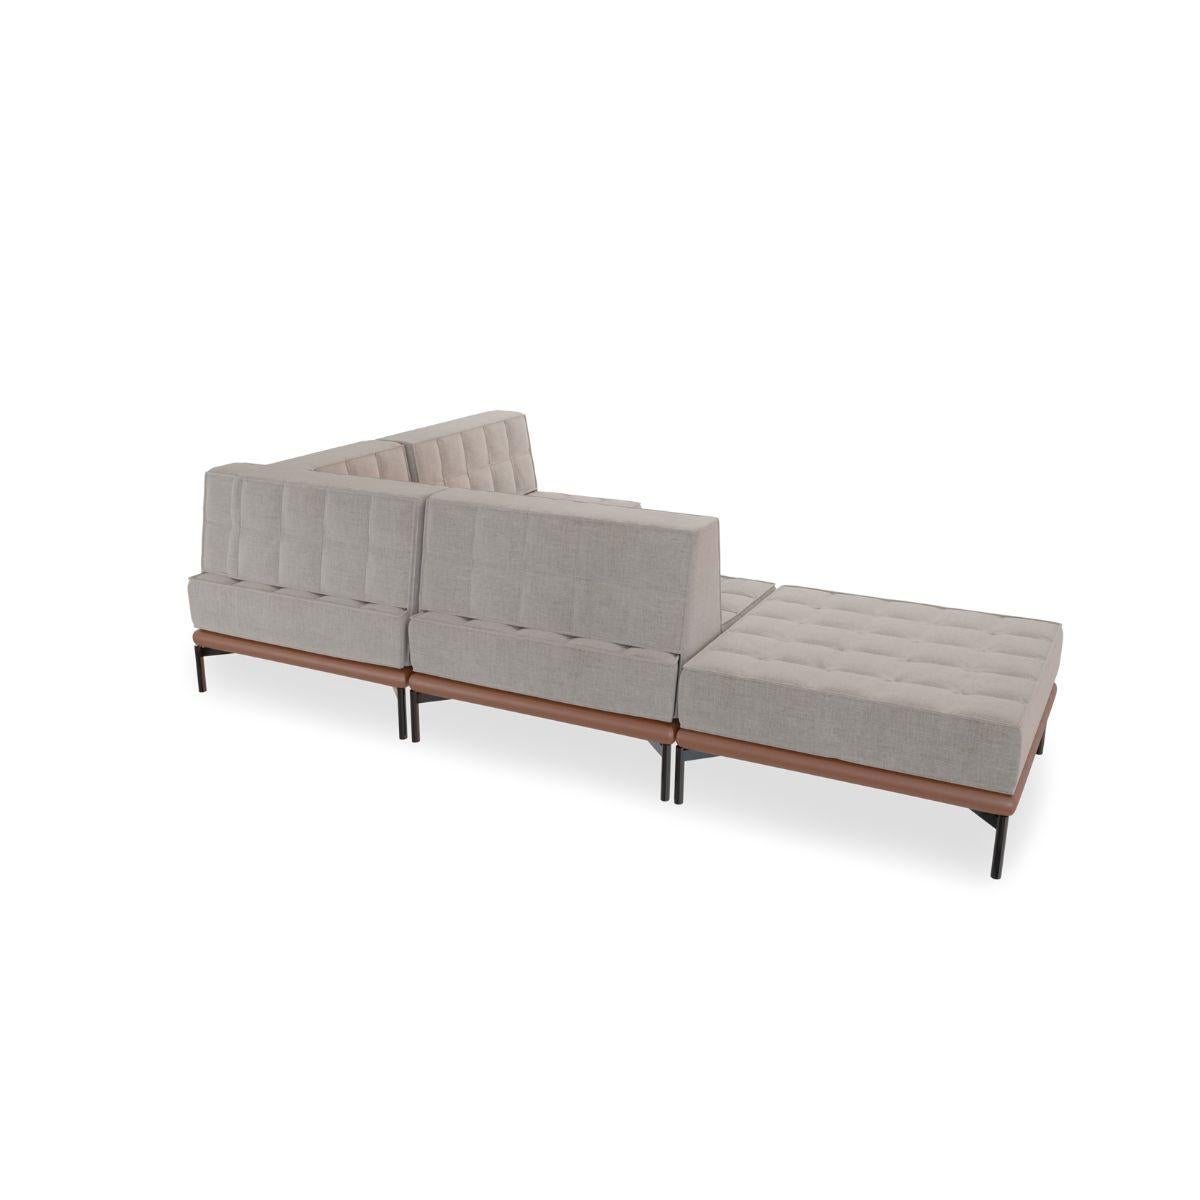 Mo Modular Sofa - 3 different modules available.

The Mo modular sofa is a contemporary and versatile piece of furniture that offers both style and flexibility. As the name suggests, this sofa is modular, meaning it can be arranged and re-arranged